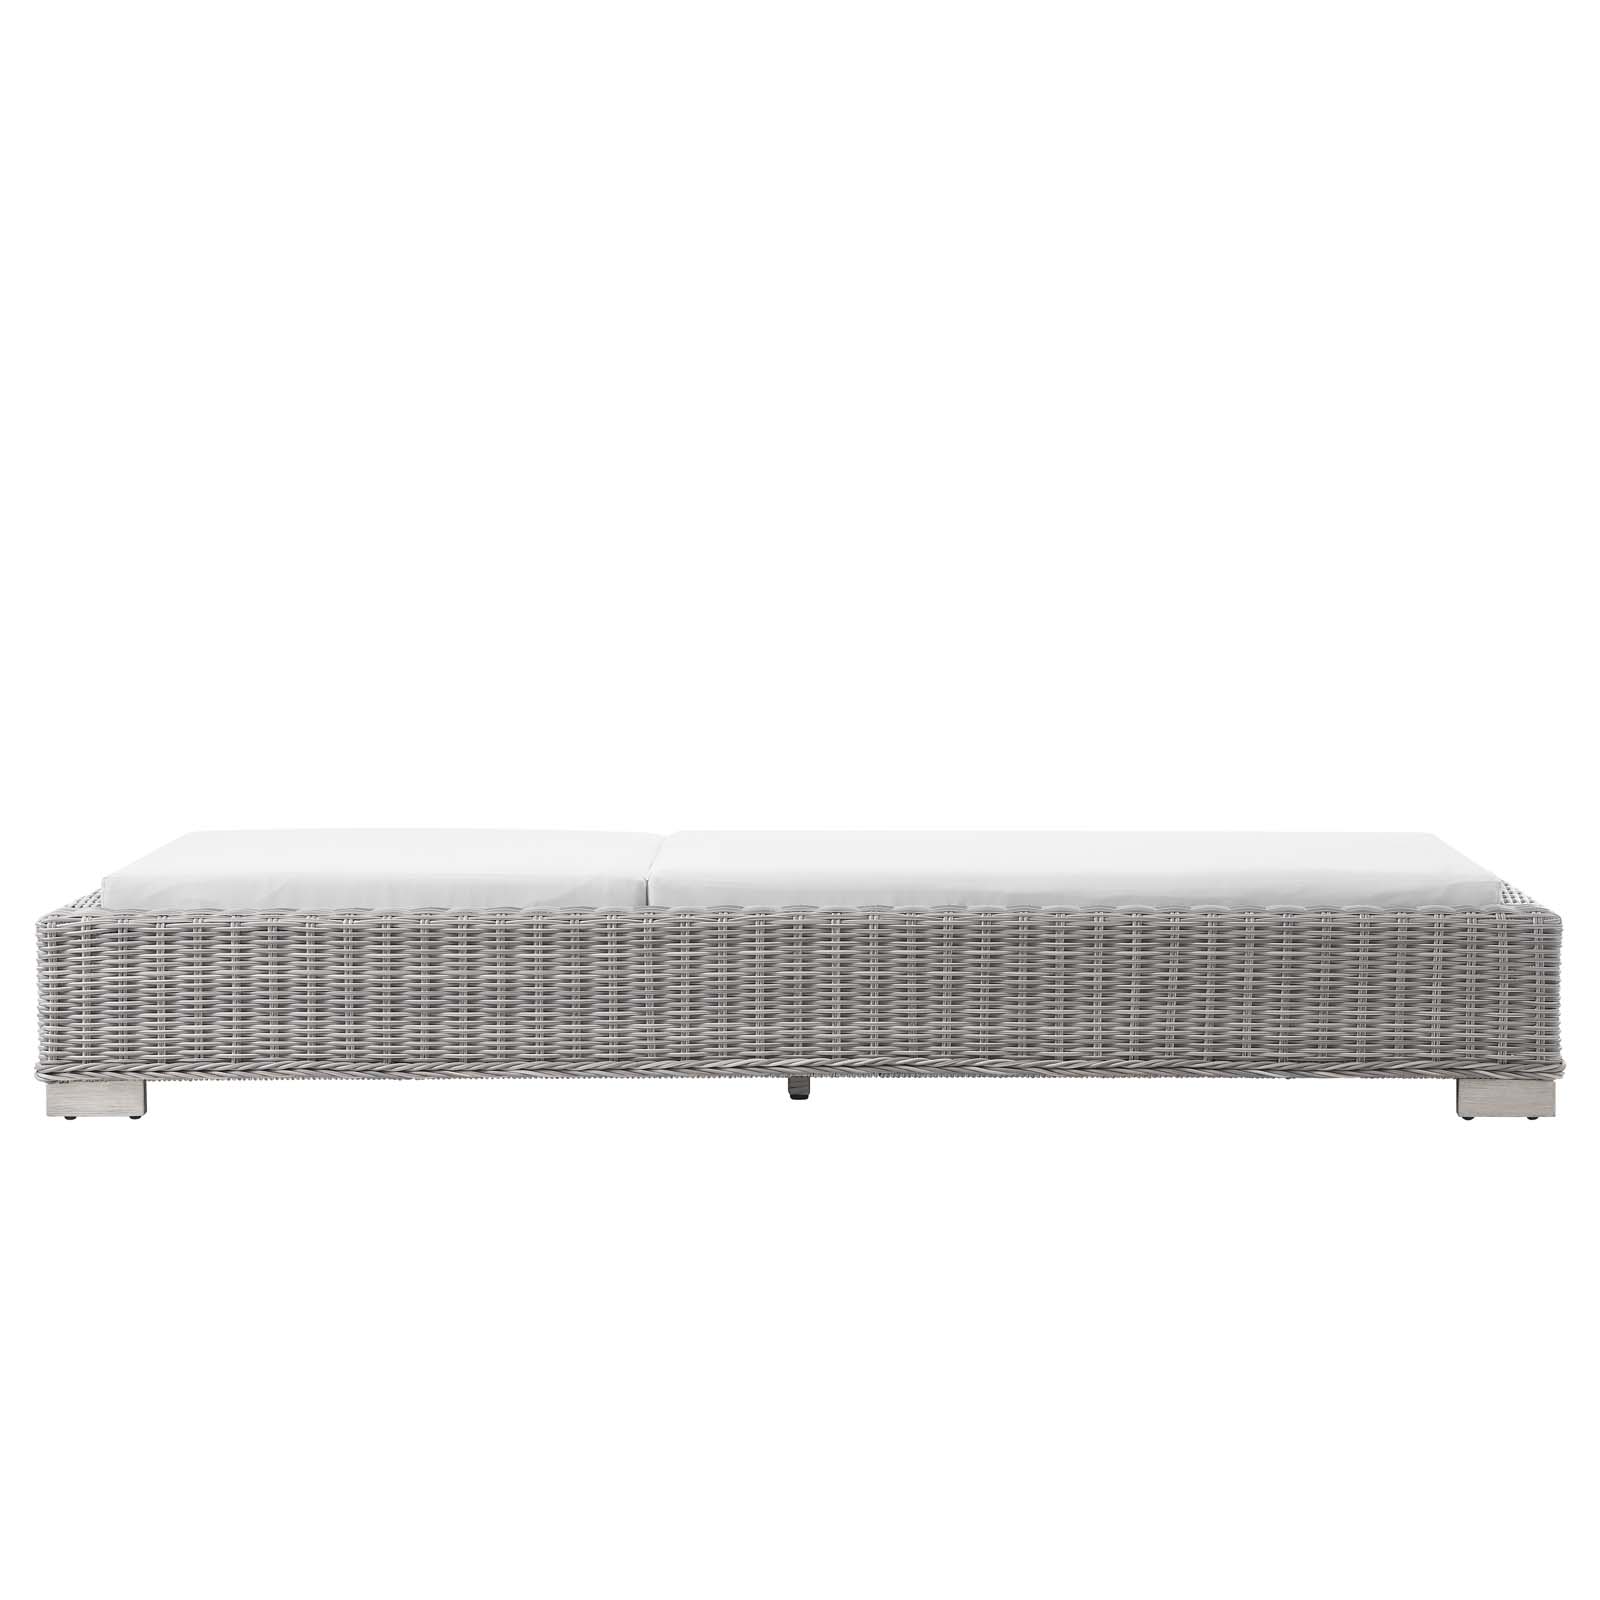 Modway Conway Outdoor Patio Wicker Rattan Chaise Lounge in Light Gray White - image 4 of 9